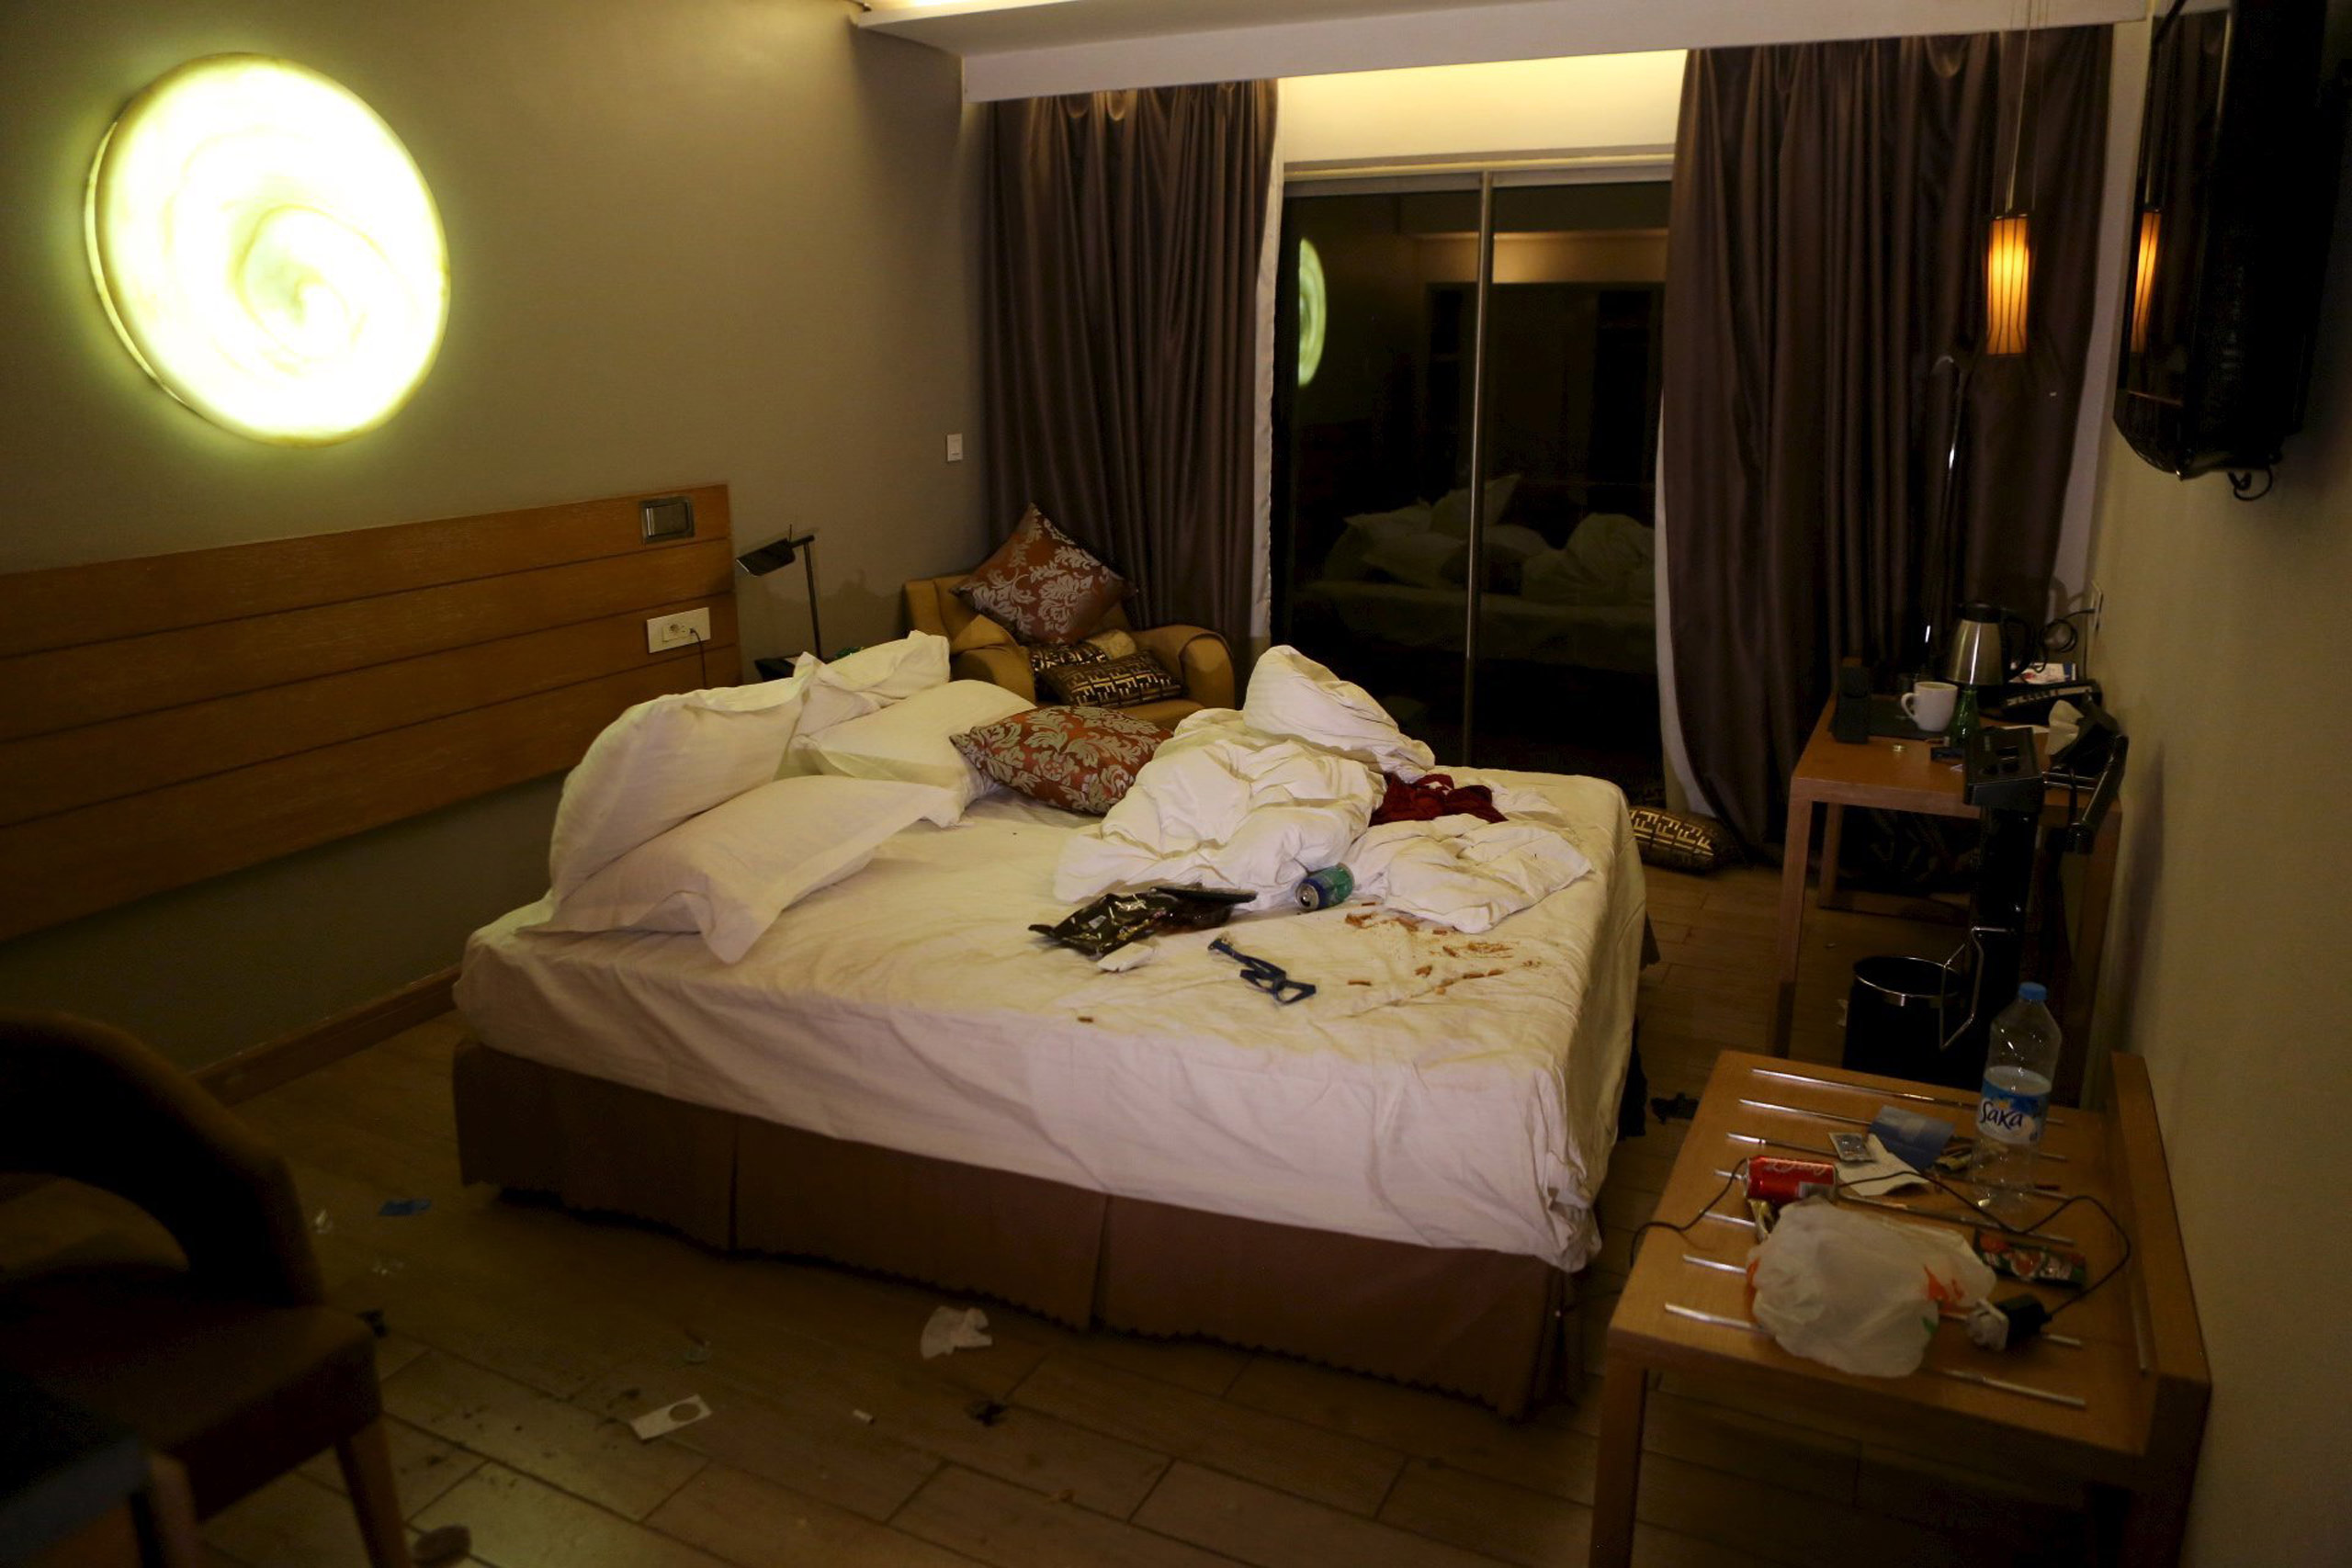 A room is seen in the Radisson hotel in Bamako, Mali, on Nov. 20, 2015.